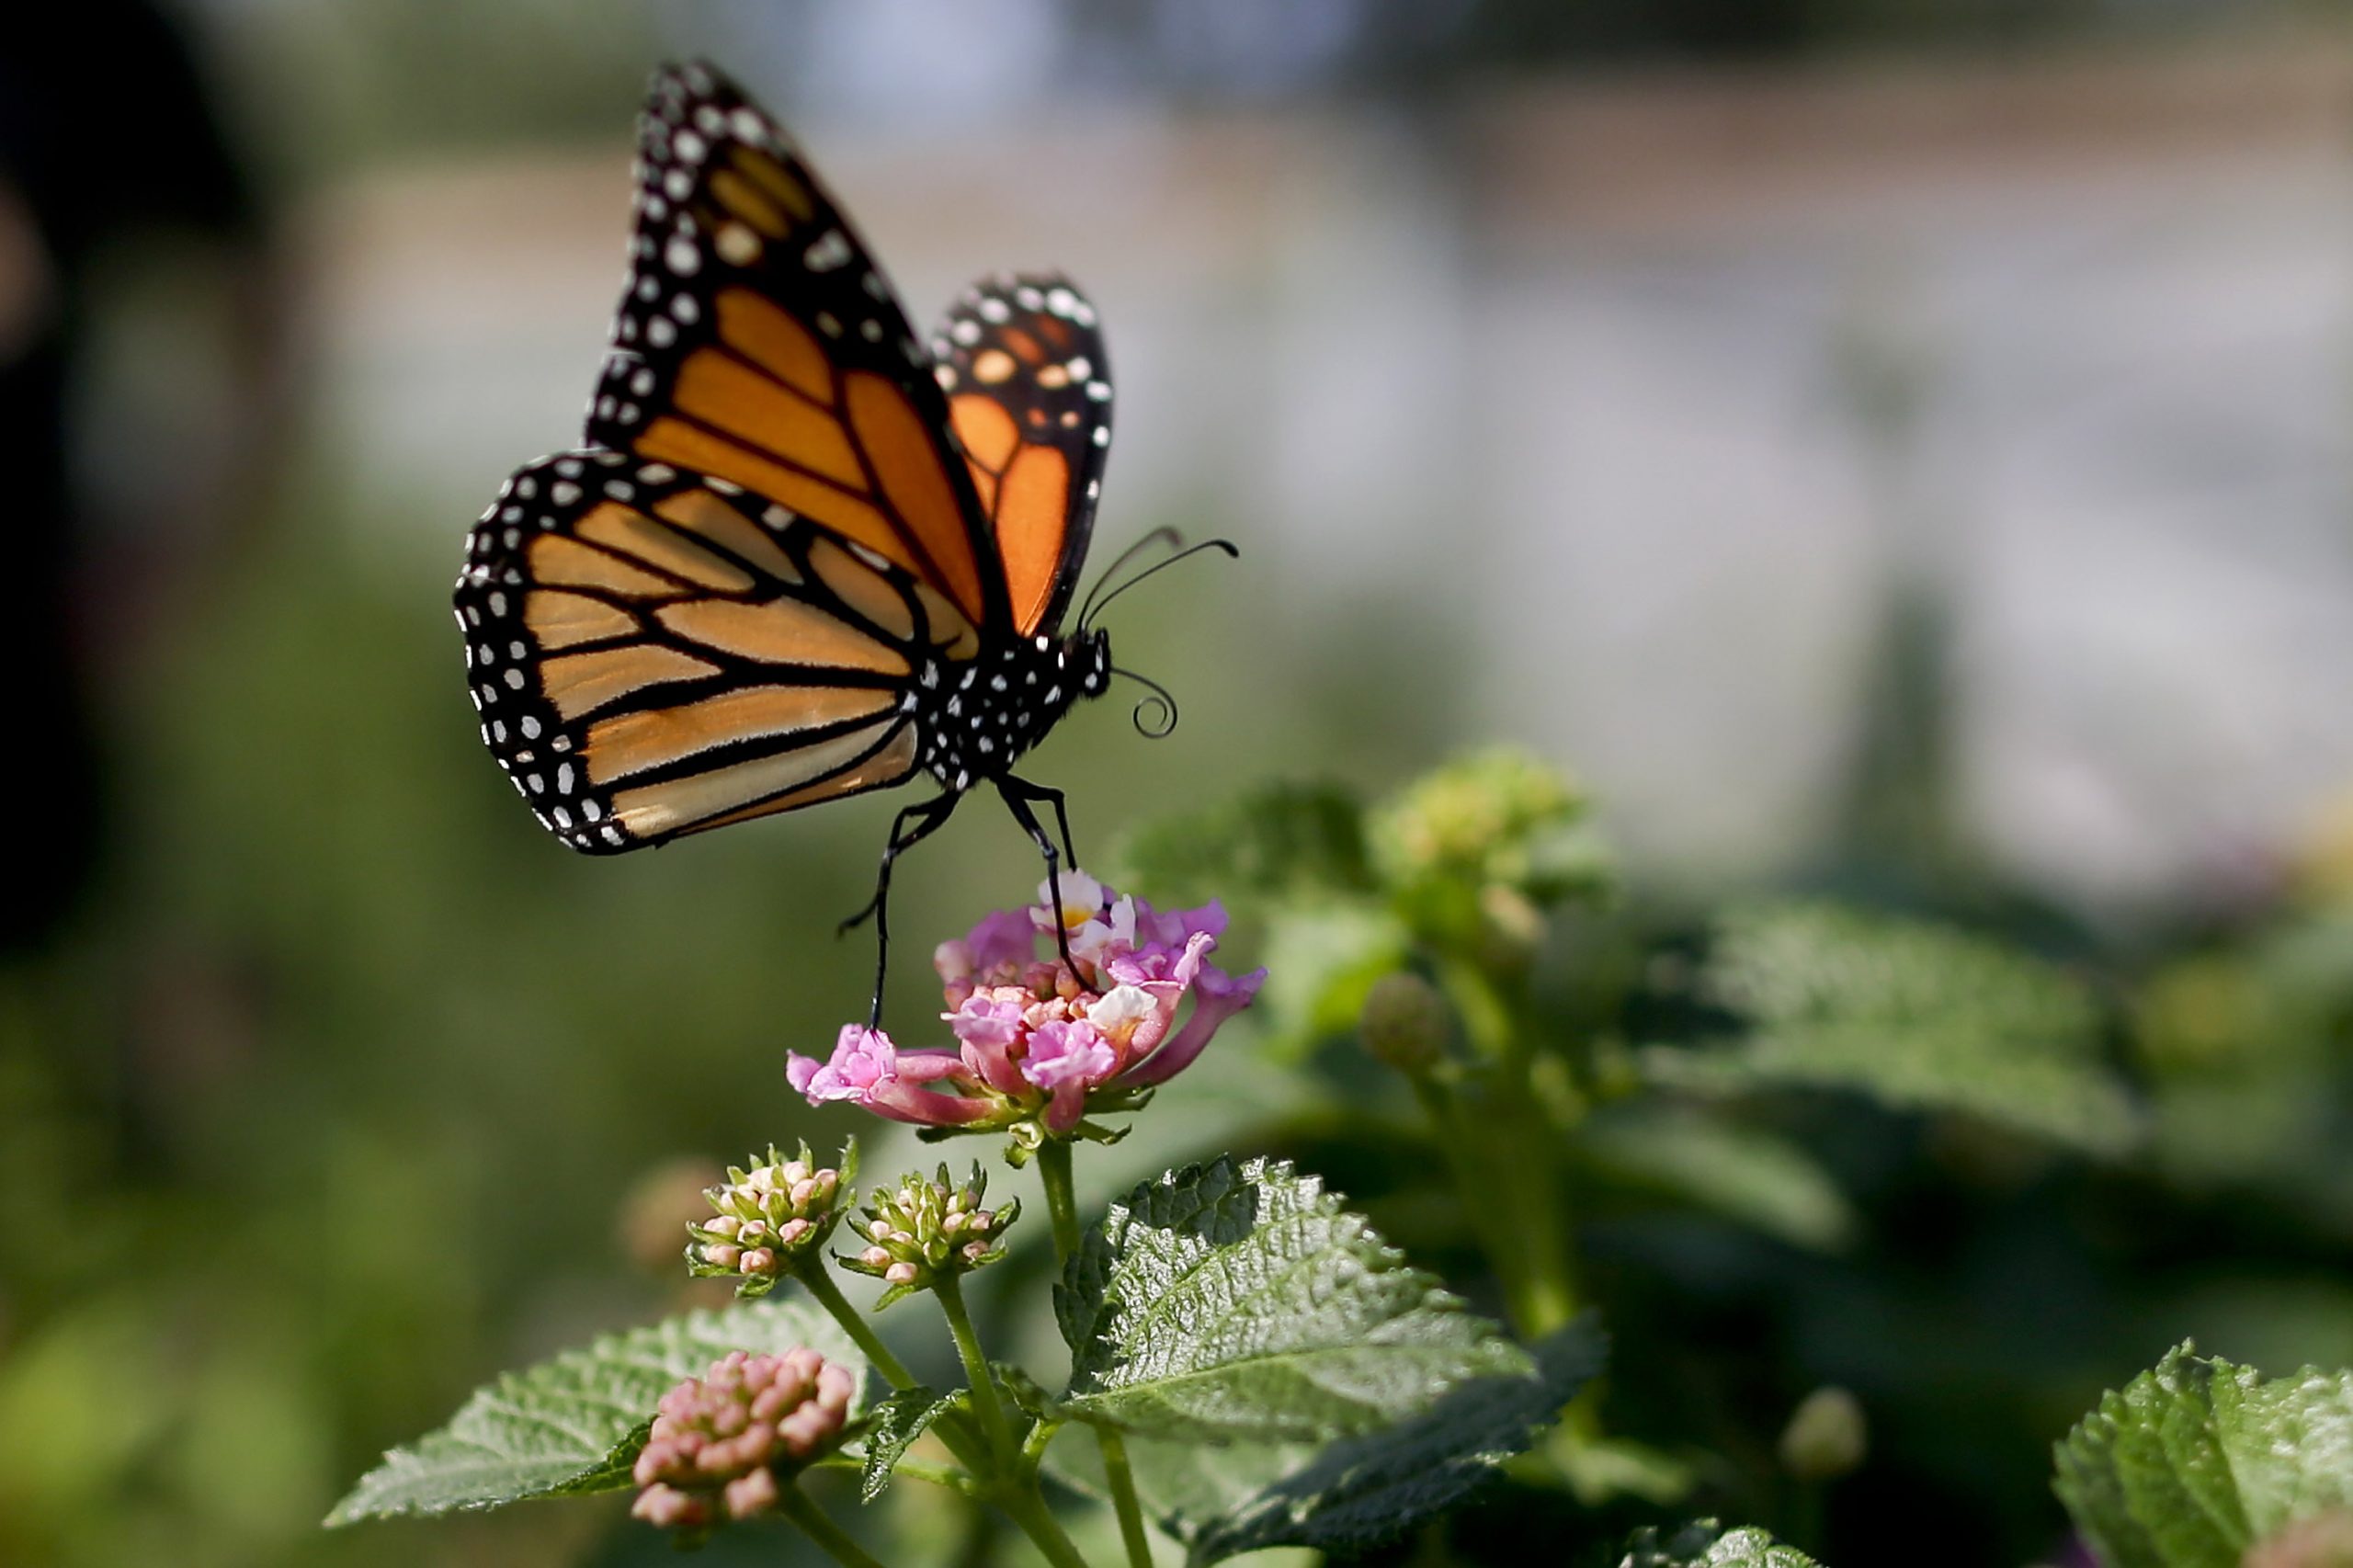 New research shows spots on monarch butterflies help them migrate ...